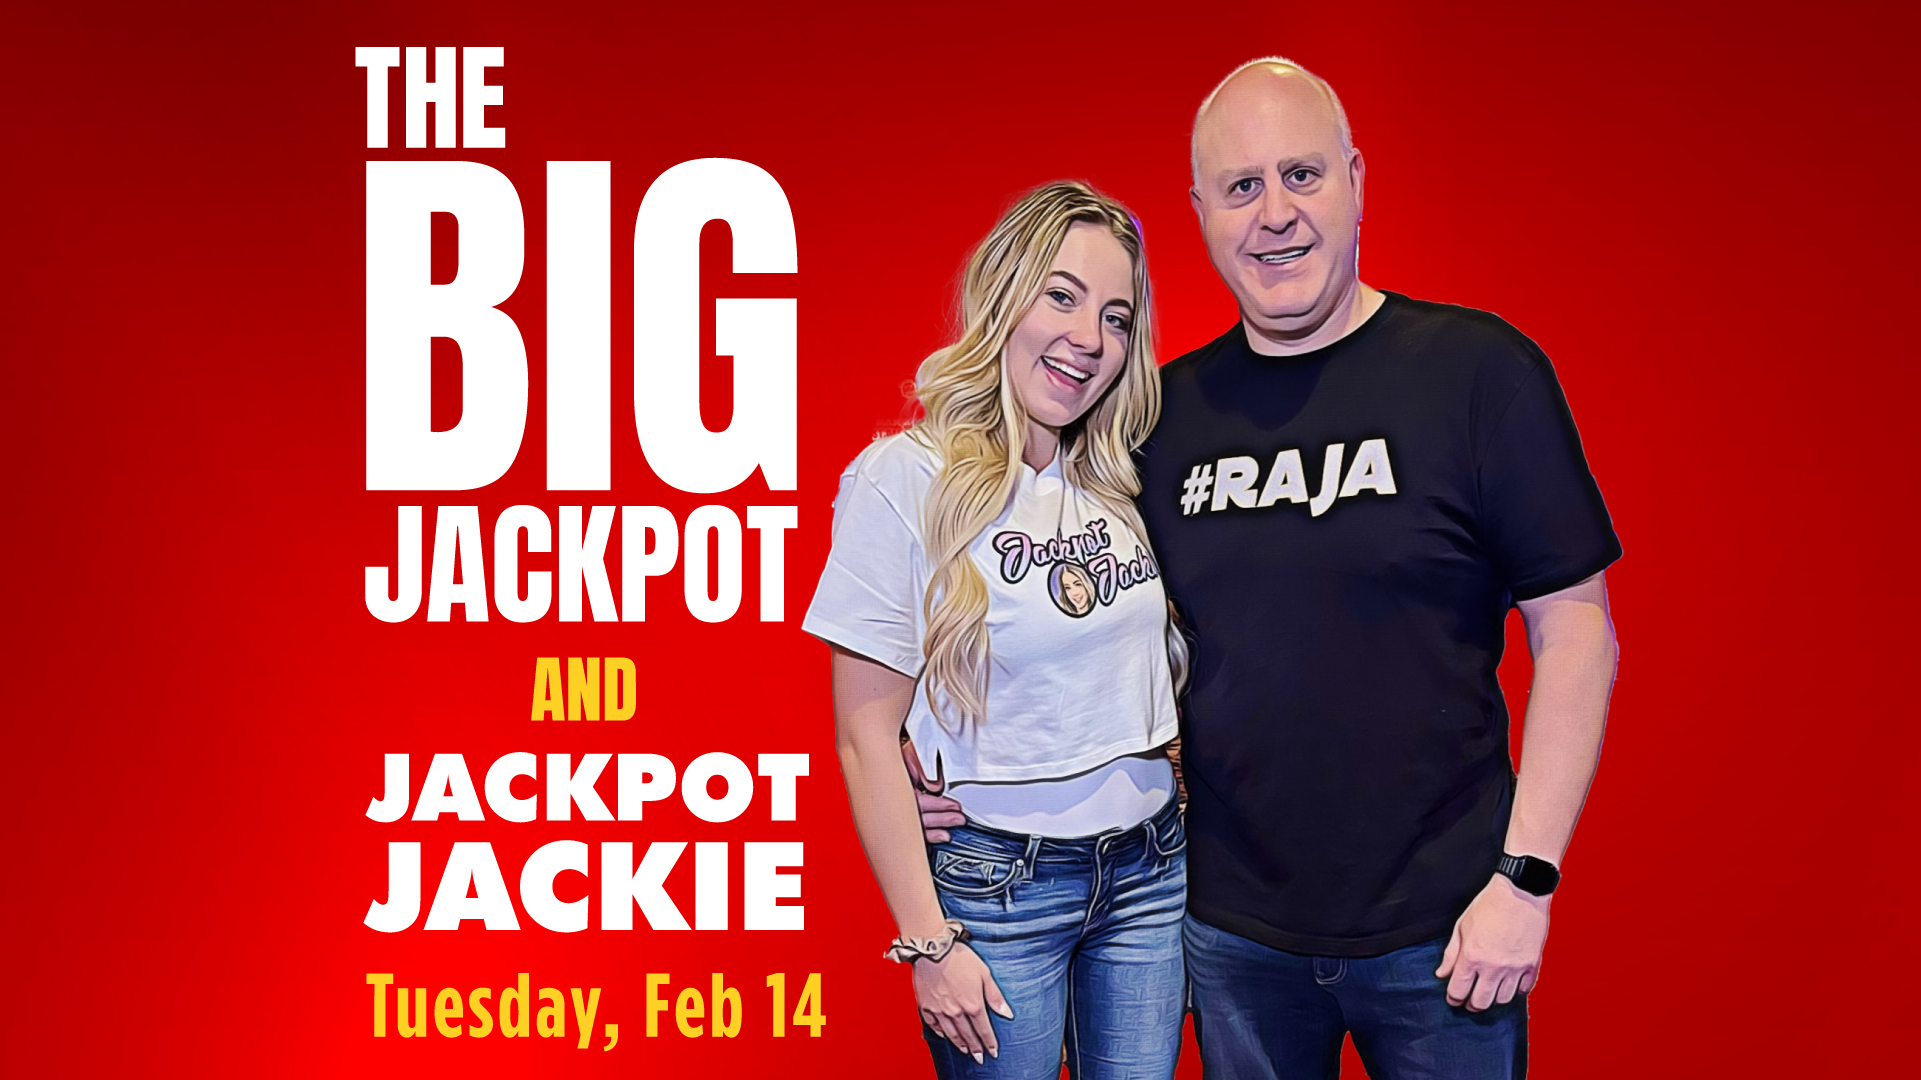 The Big Jackpot and Jackpot Jackie Tuesday, Feb 14 6PM - 10PM At Grand Z Casino This Valentine's Day Meet and Hang With Internet Sensations Earn 50 Points For FREE Big Jackpot Swag!